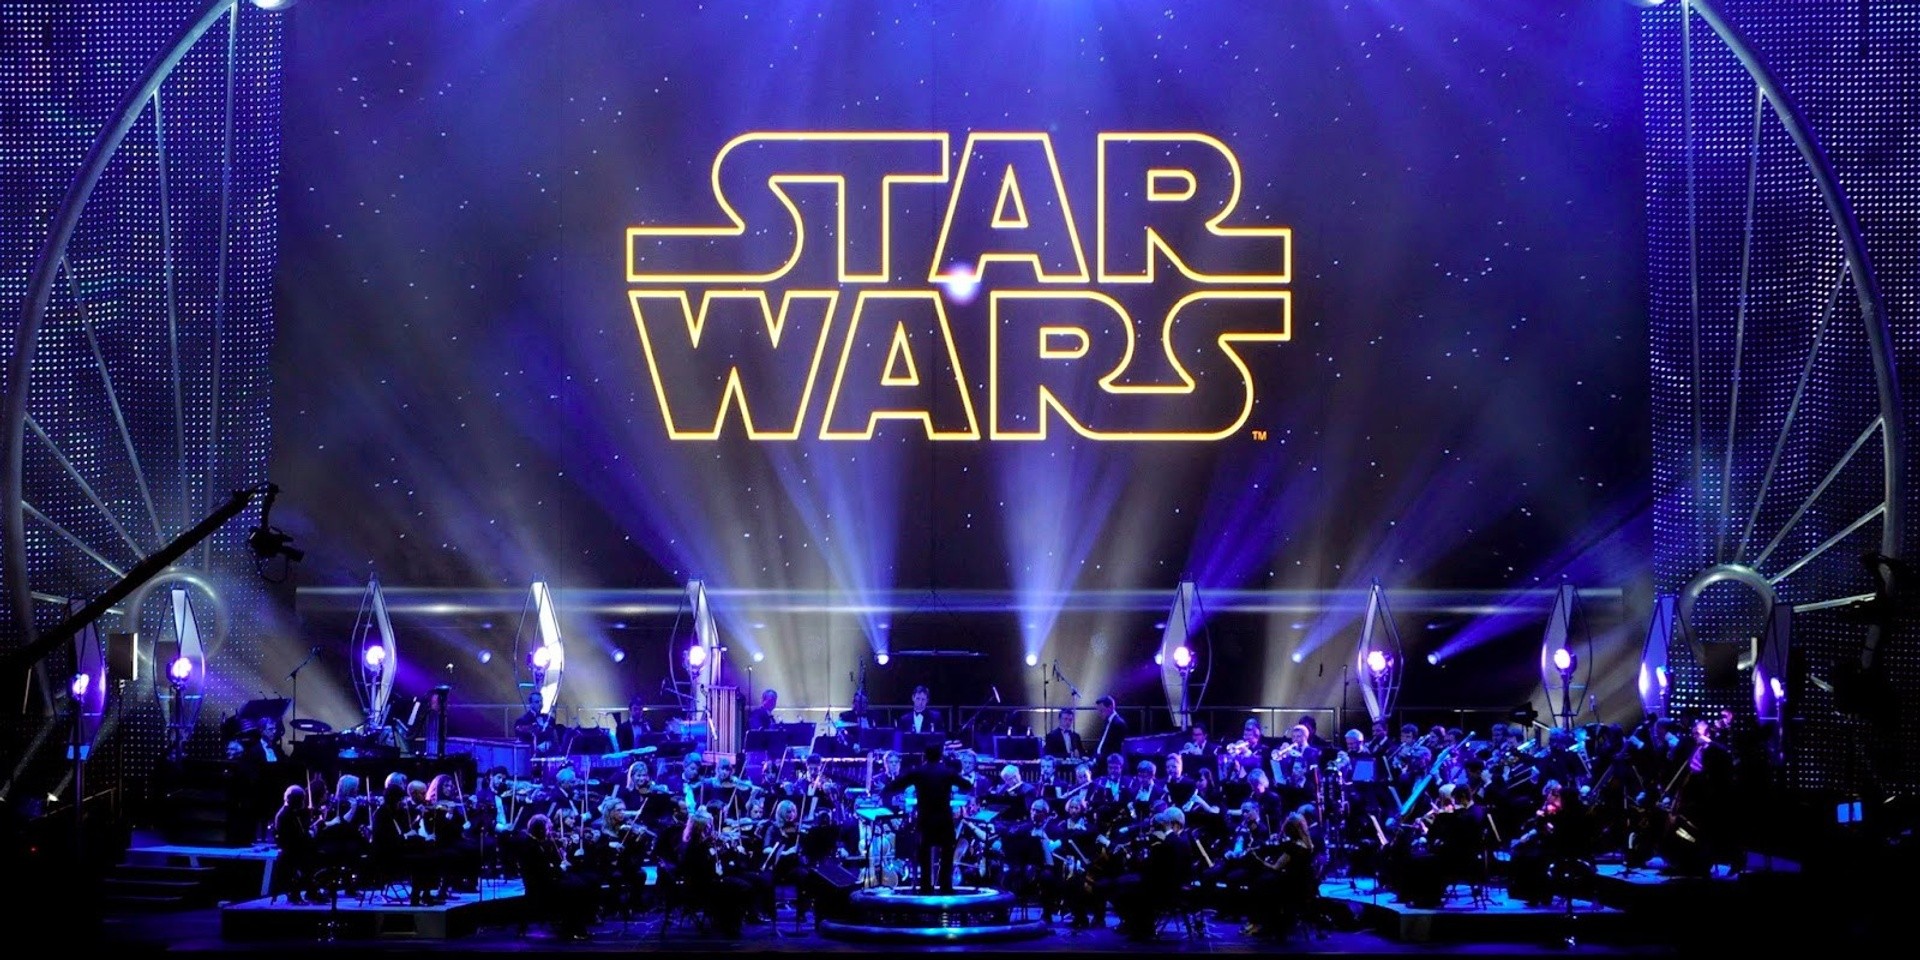 You can watch Star Wars: The Force Awakens in Singapore with a full orchestra